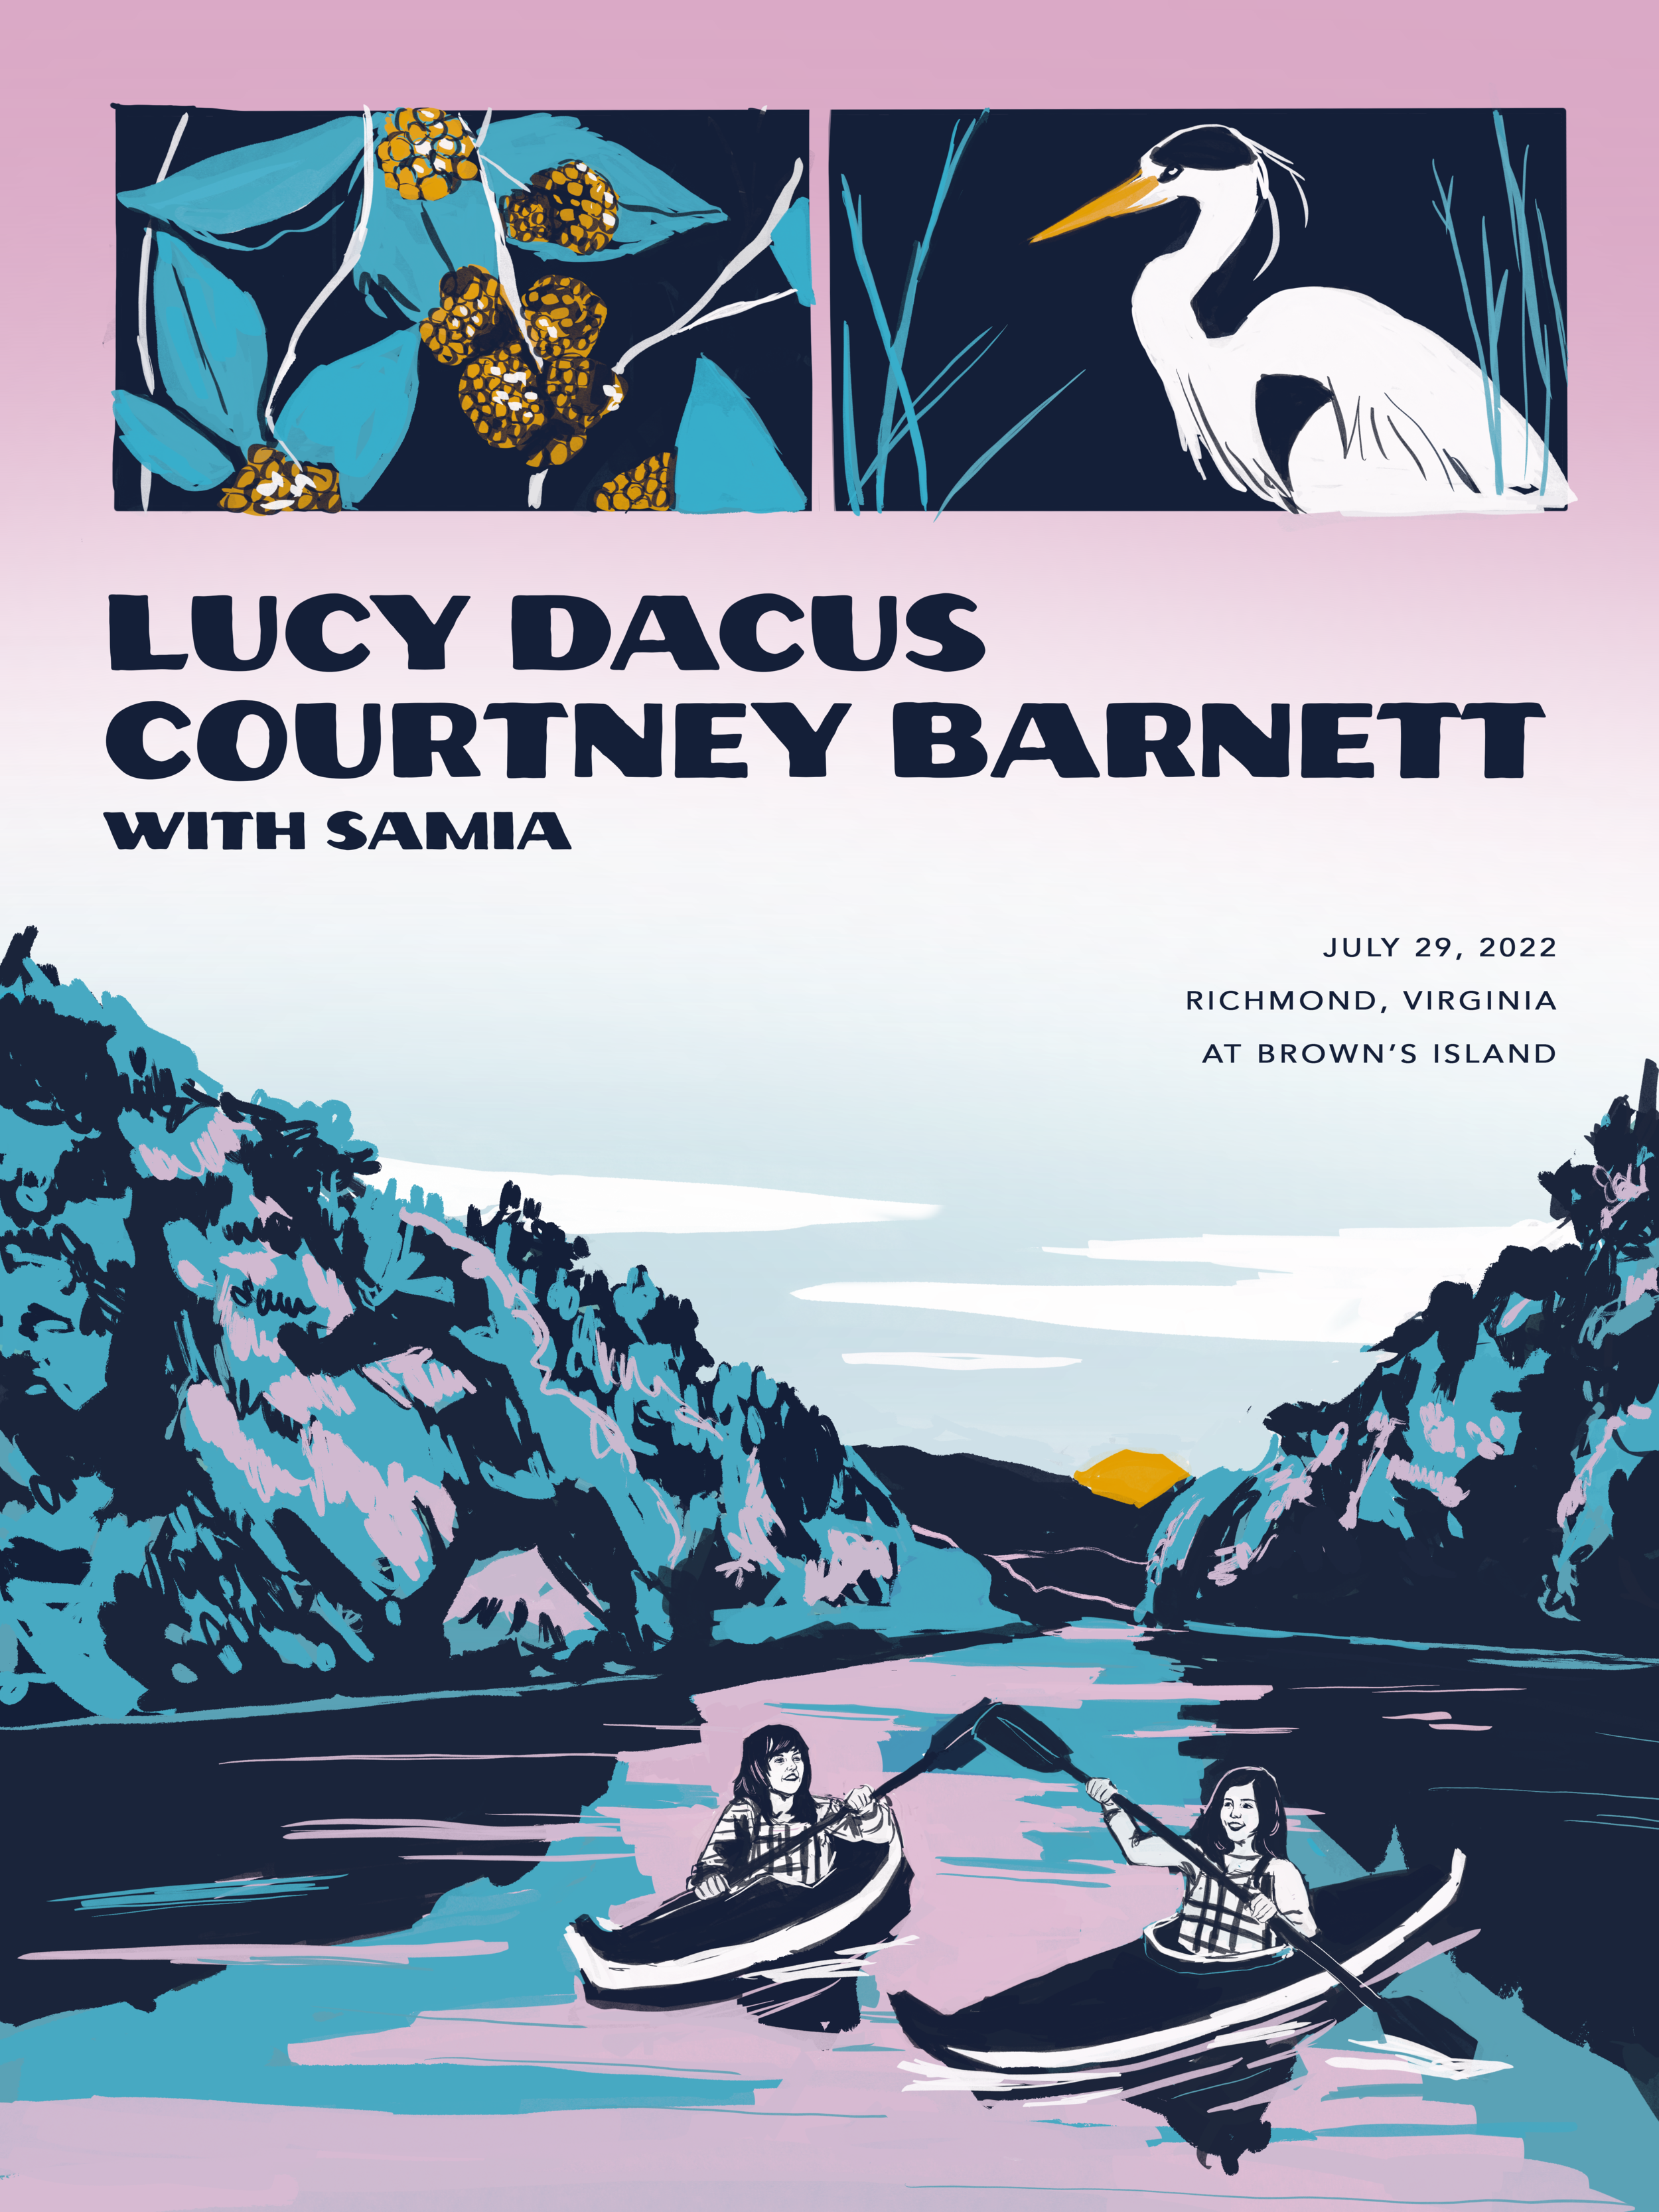 Poster for Lucy Dacus + Courtney Barnett show